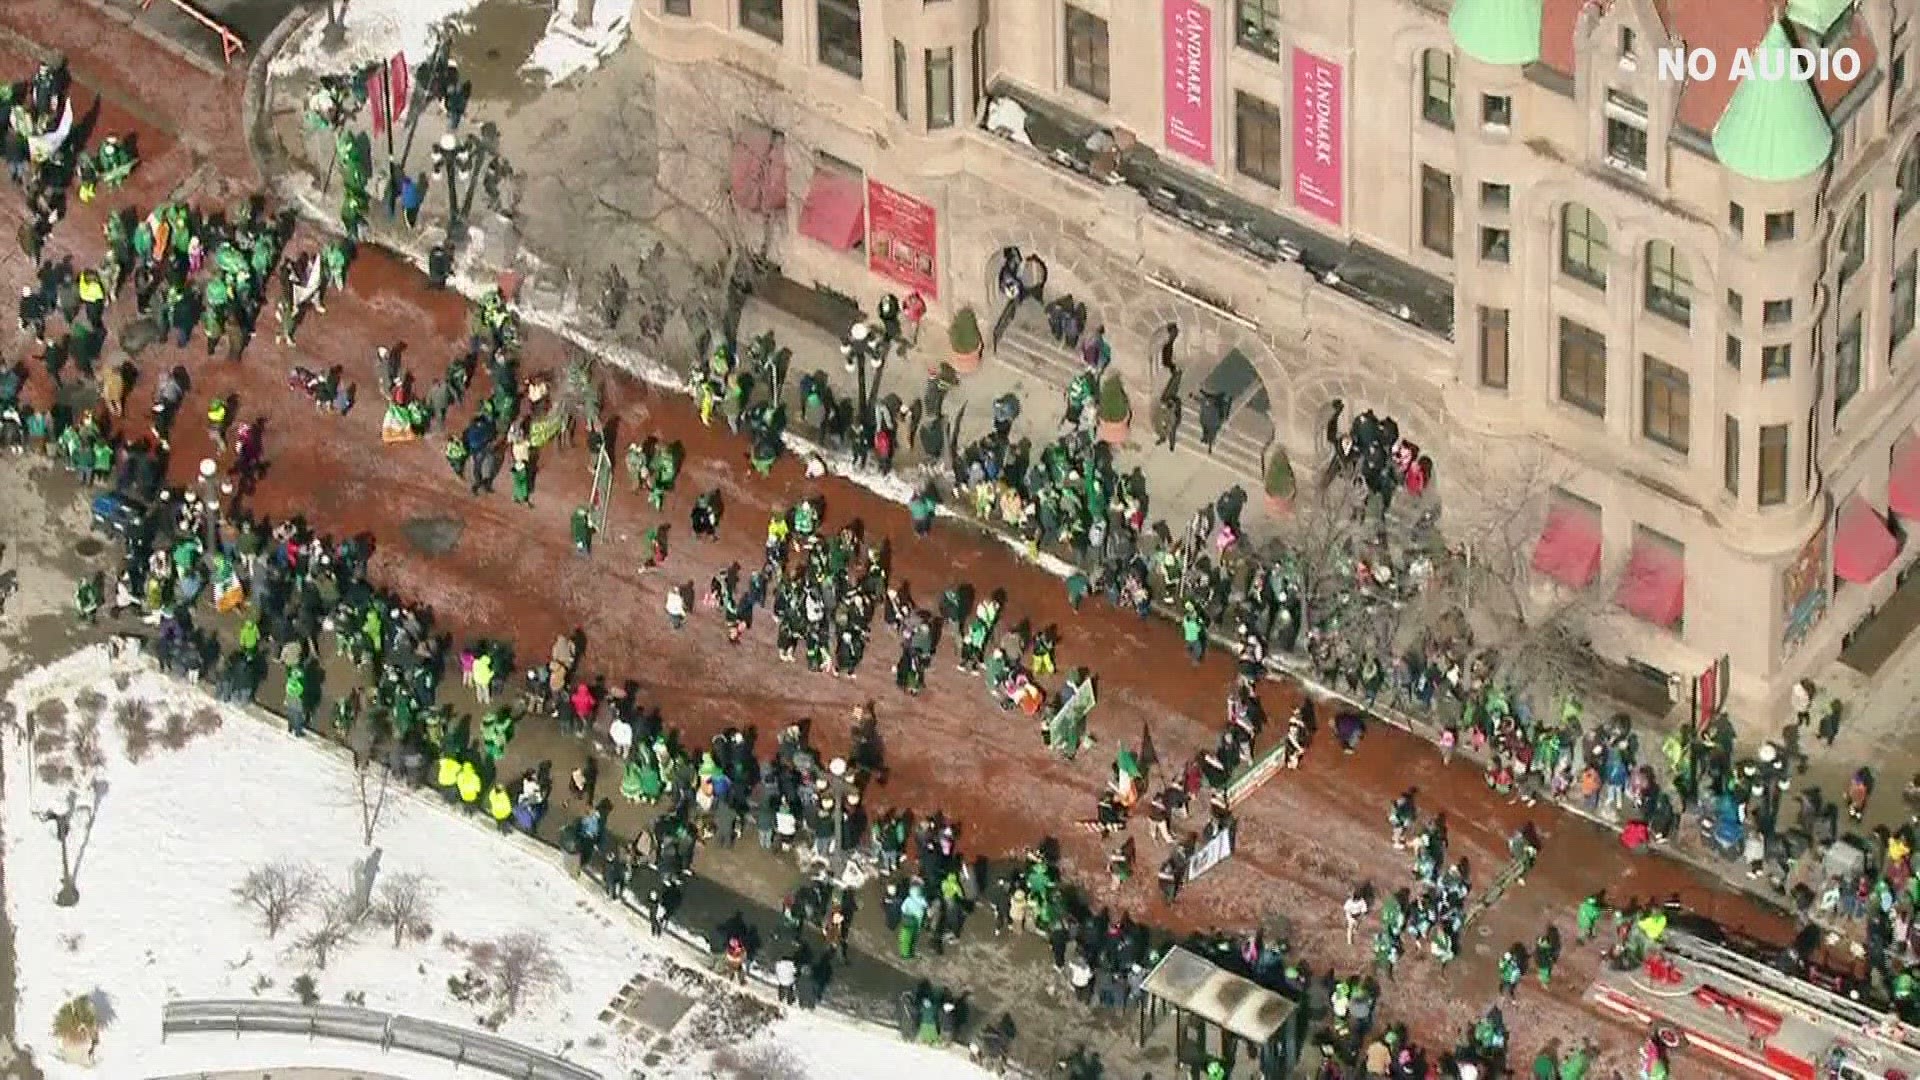 Cold temperatures couldn't keep this enthusiastic crowd away from the annual St. Paul St. Patrick's Day Parade!